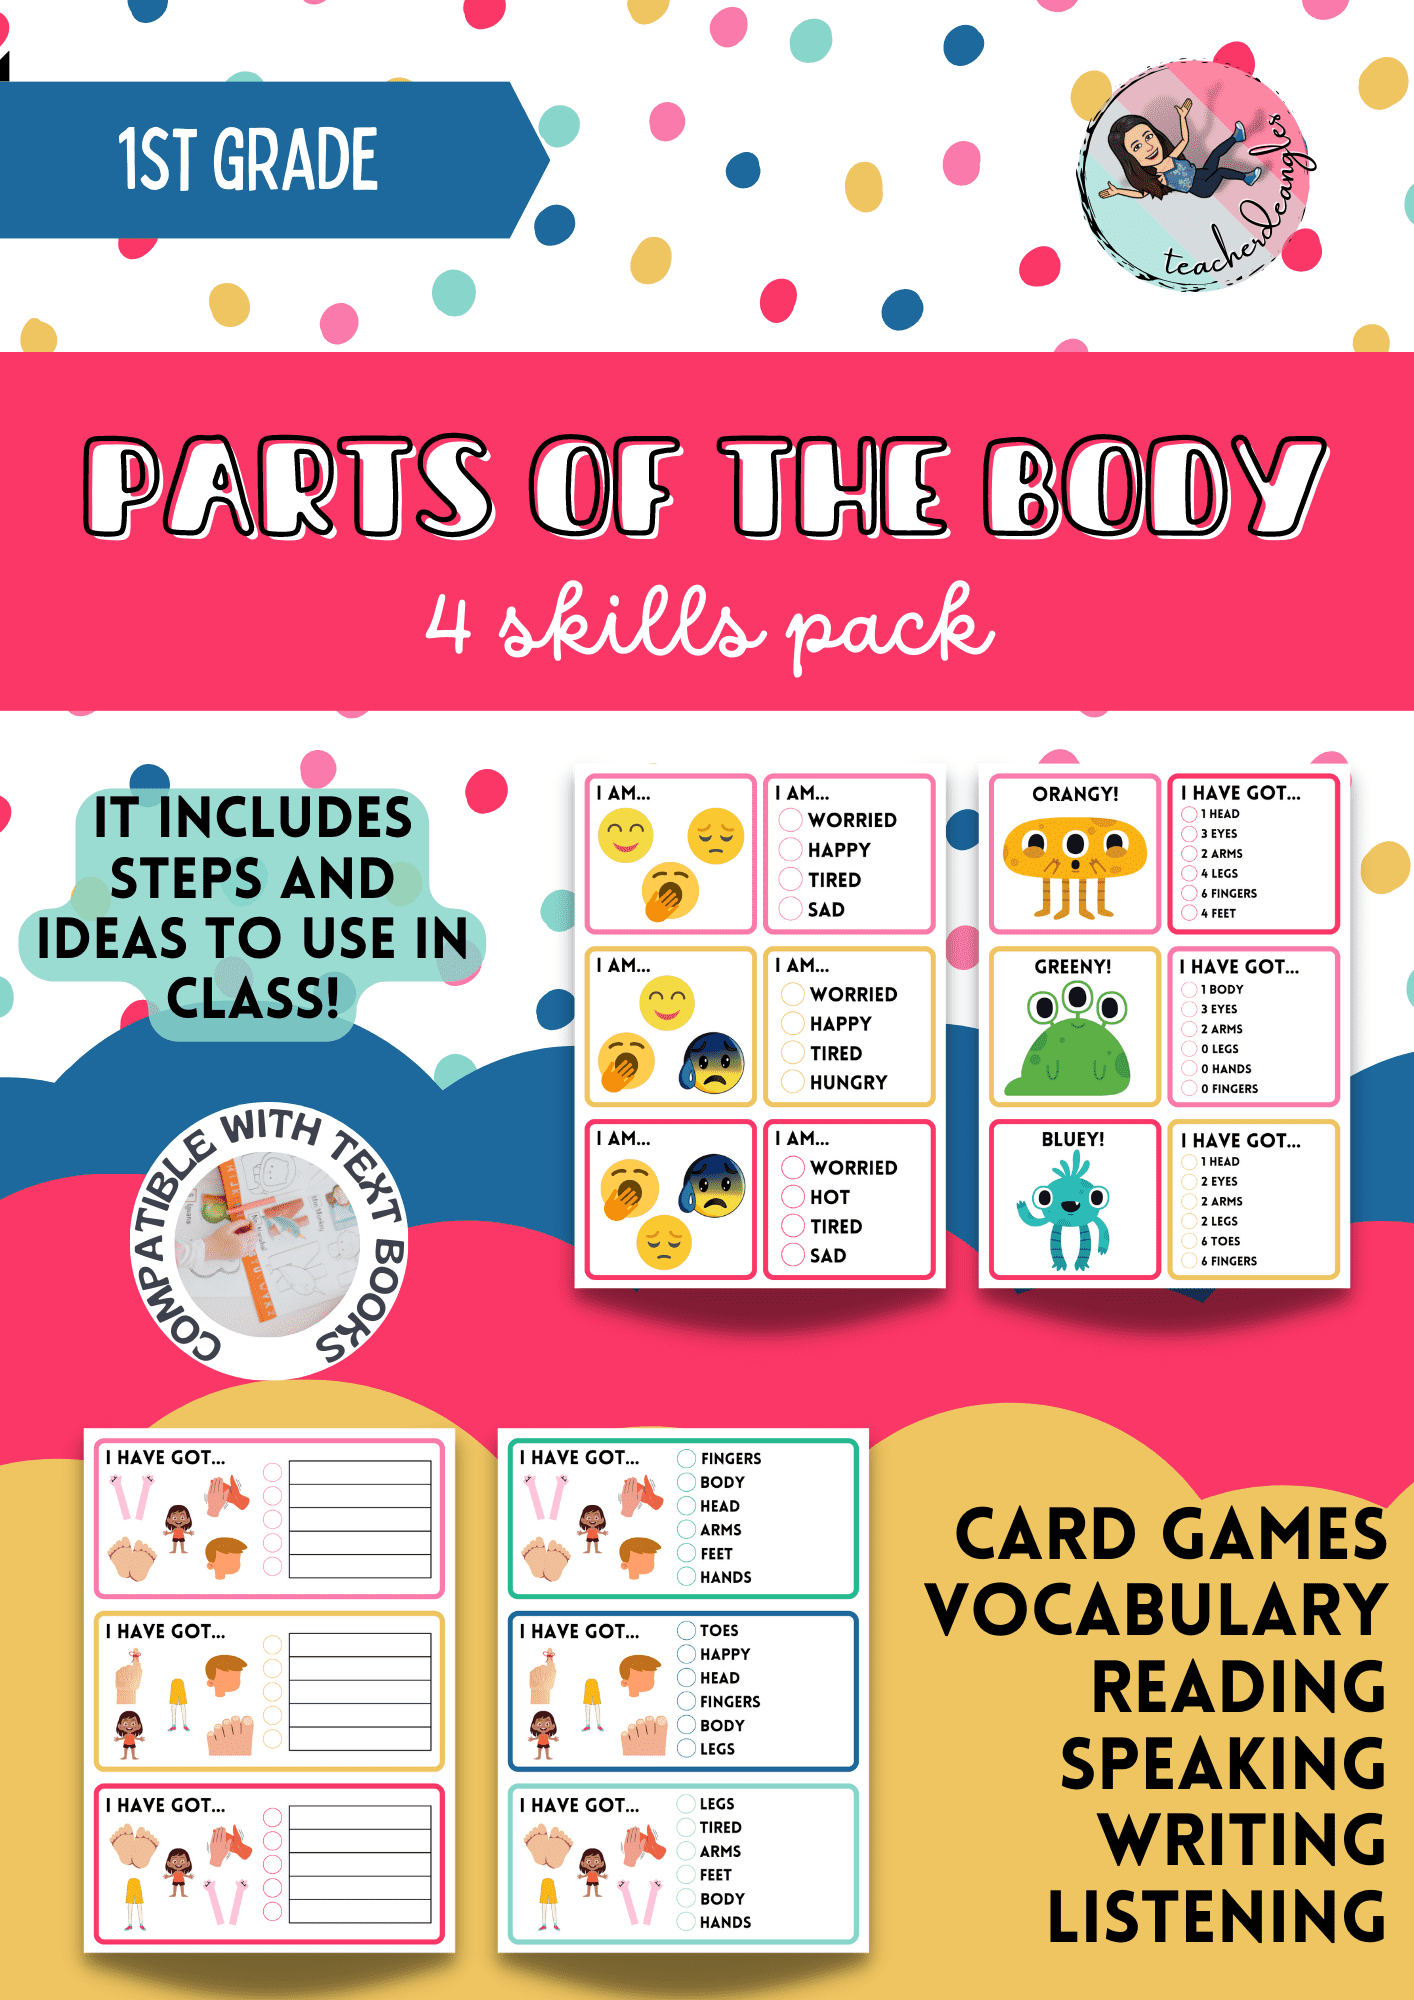 PARTS OF THE BODY: 4 SKILLS PACK